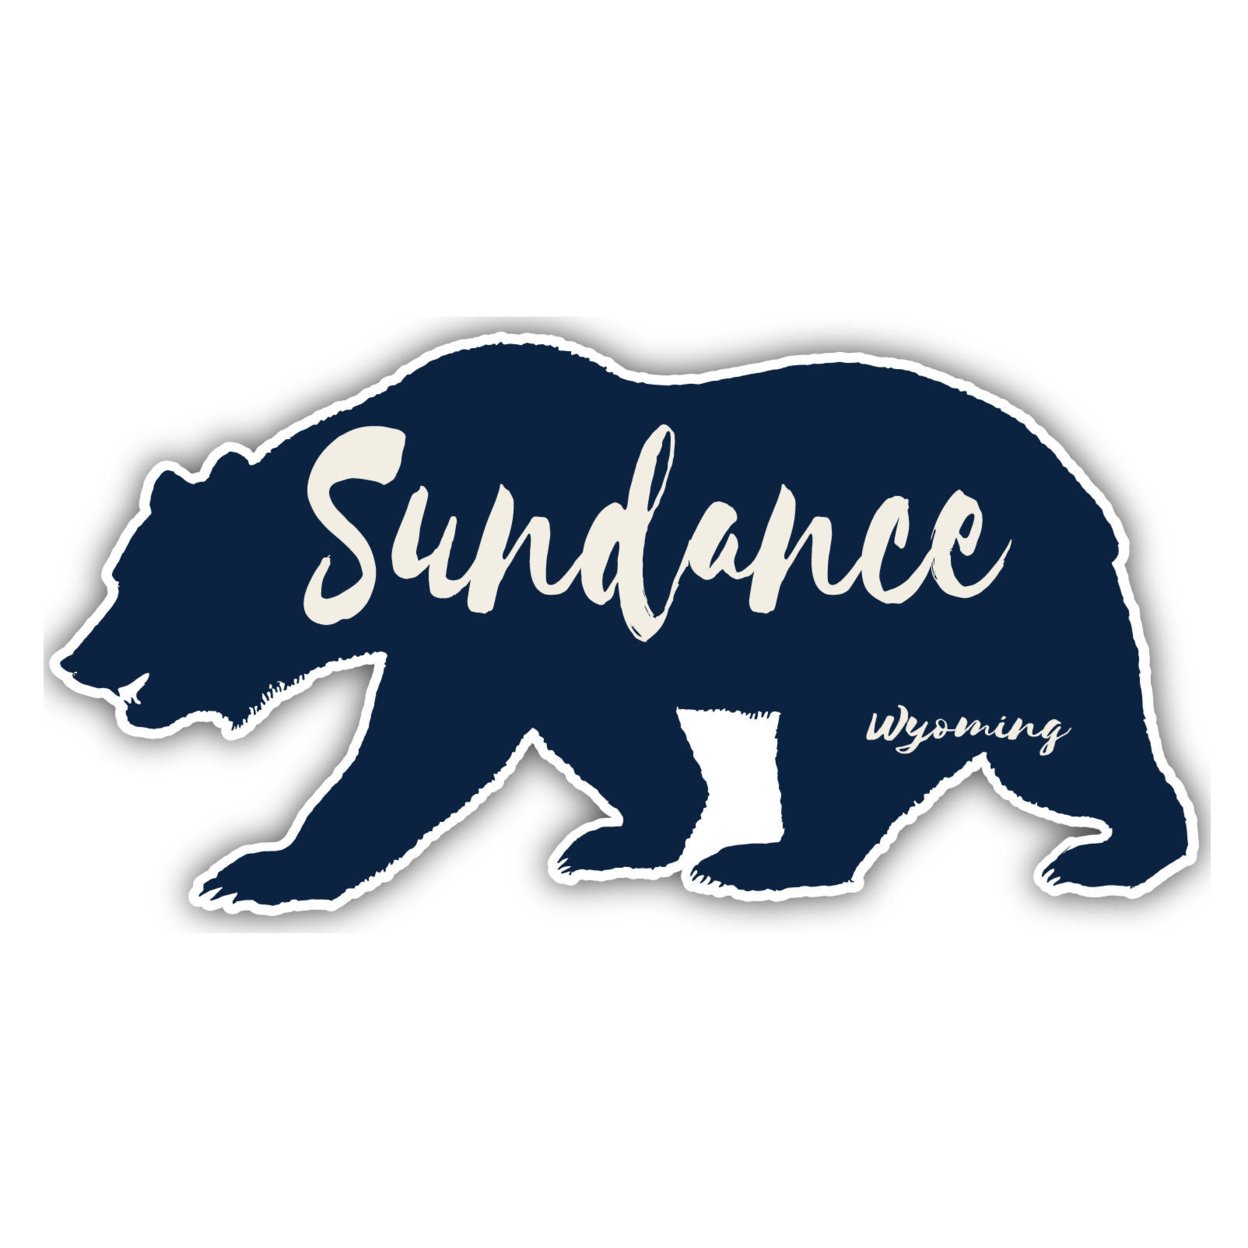 Sundance Wyoming Souvenir Decorative Stickers (Choose Theme And Size) - Single Unit, 2-Inch, Great Outdoors